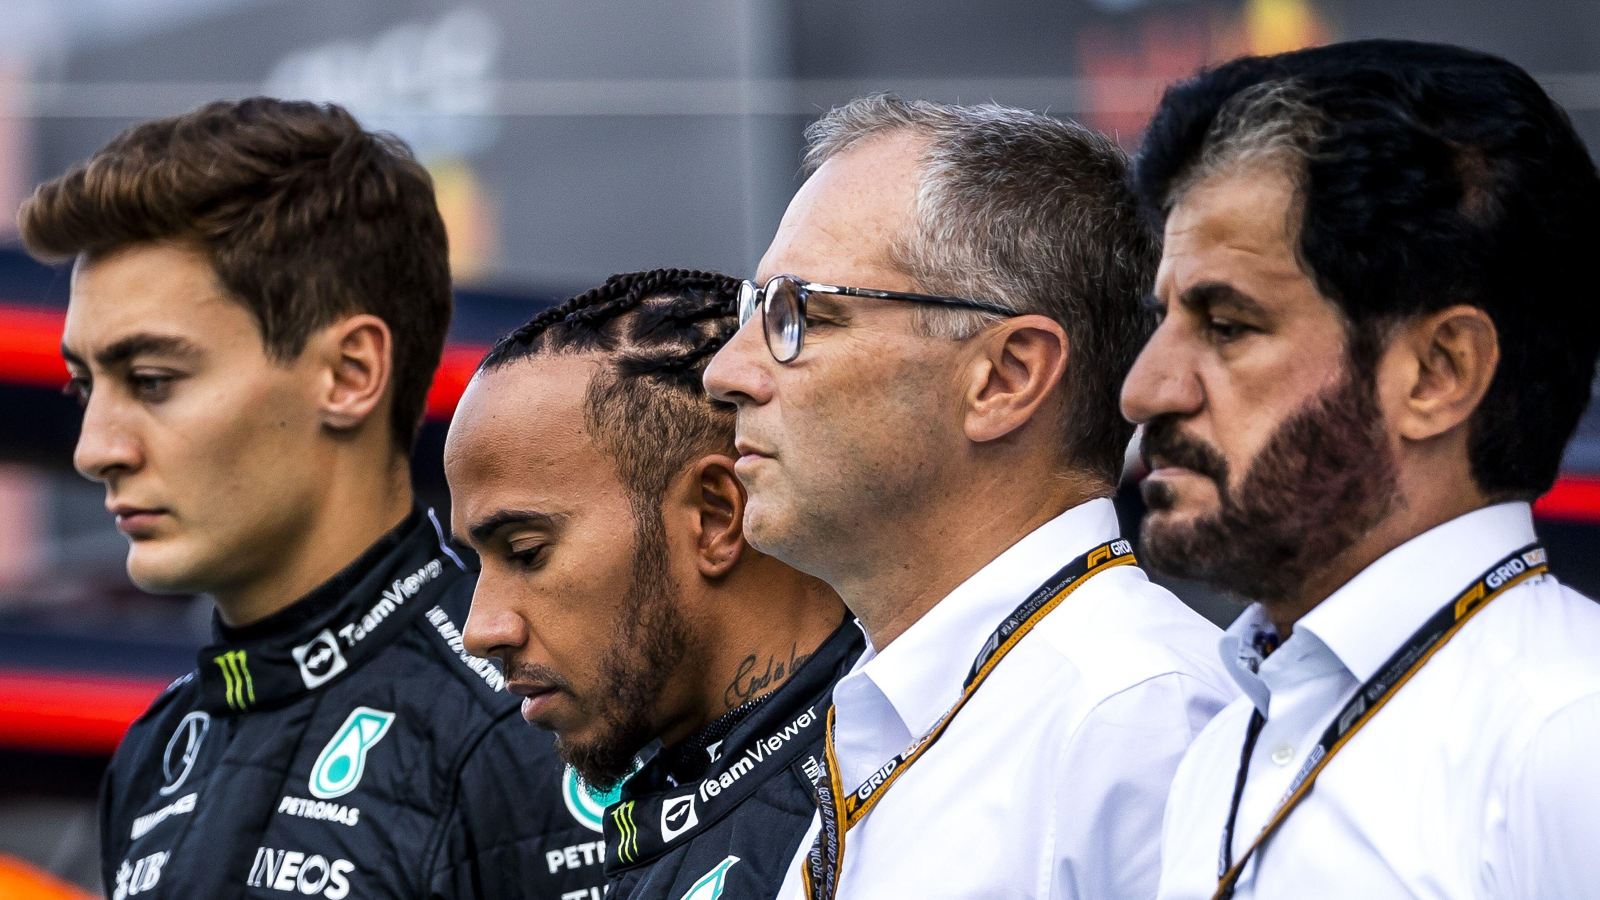 George Russell (Mercedes), Lewis Hamilton (Mercedes), Stefano Domenicali (F1) and Mohammed Ben Sulayem. Monza, September 2022.